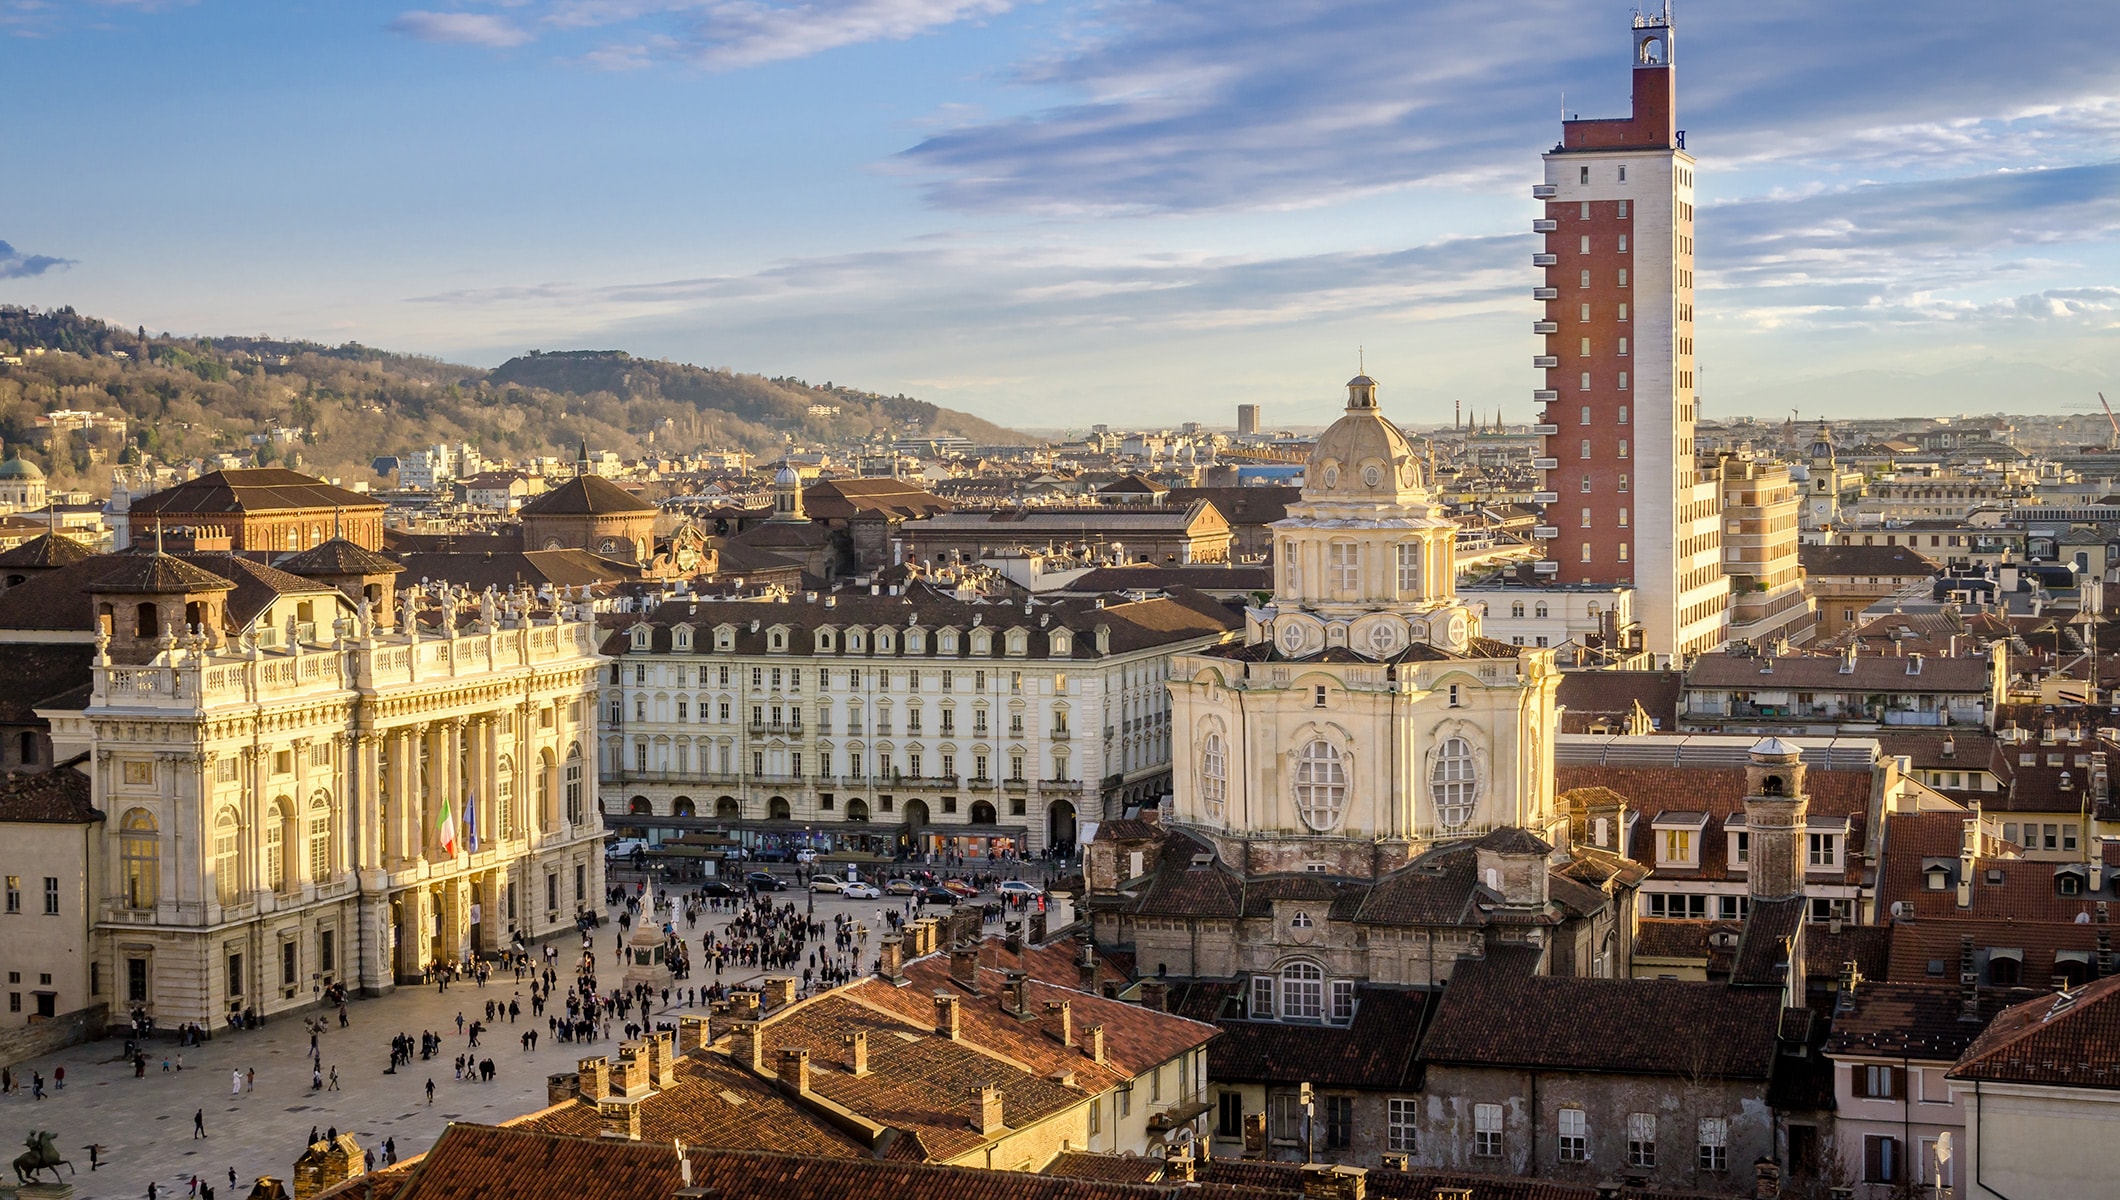 Torino 2006: transforming the perception of a city - Olympic News